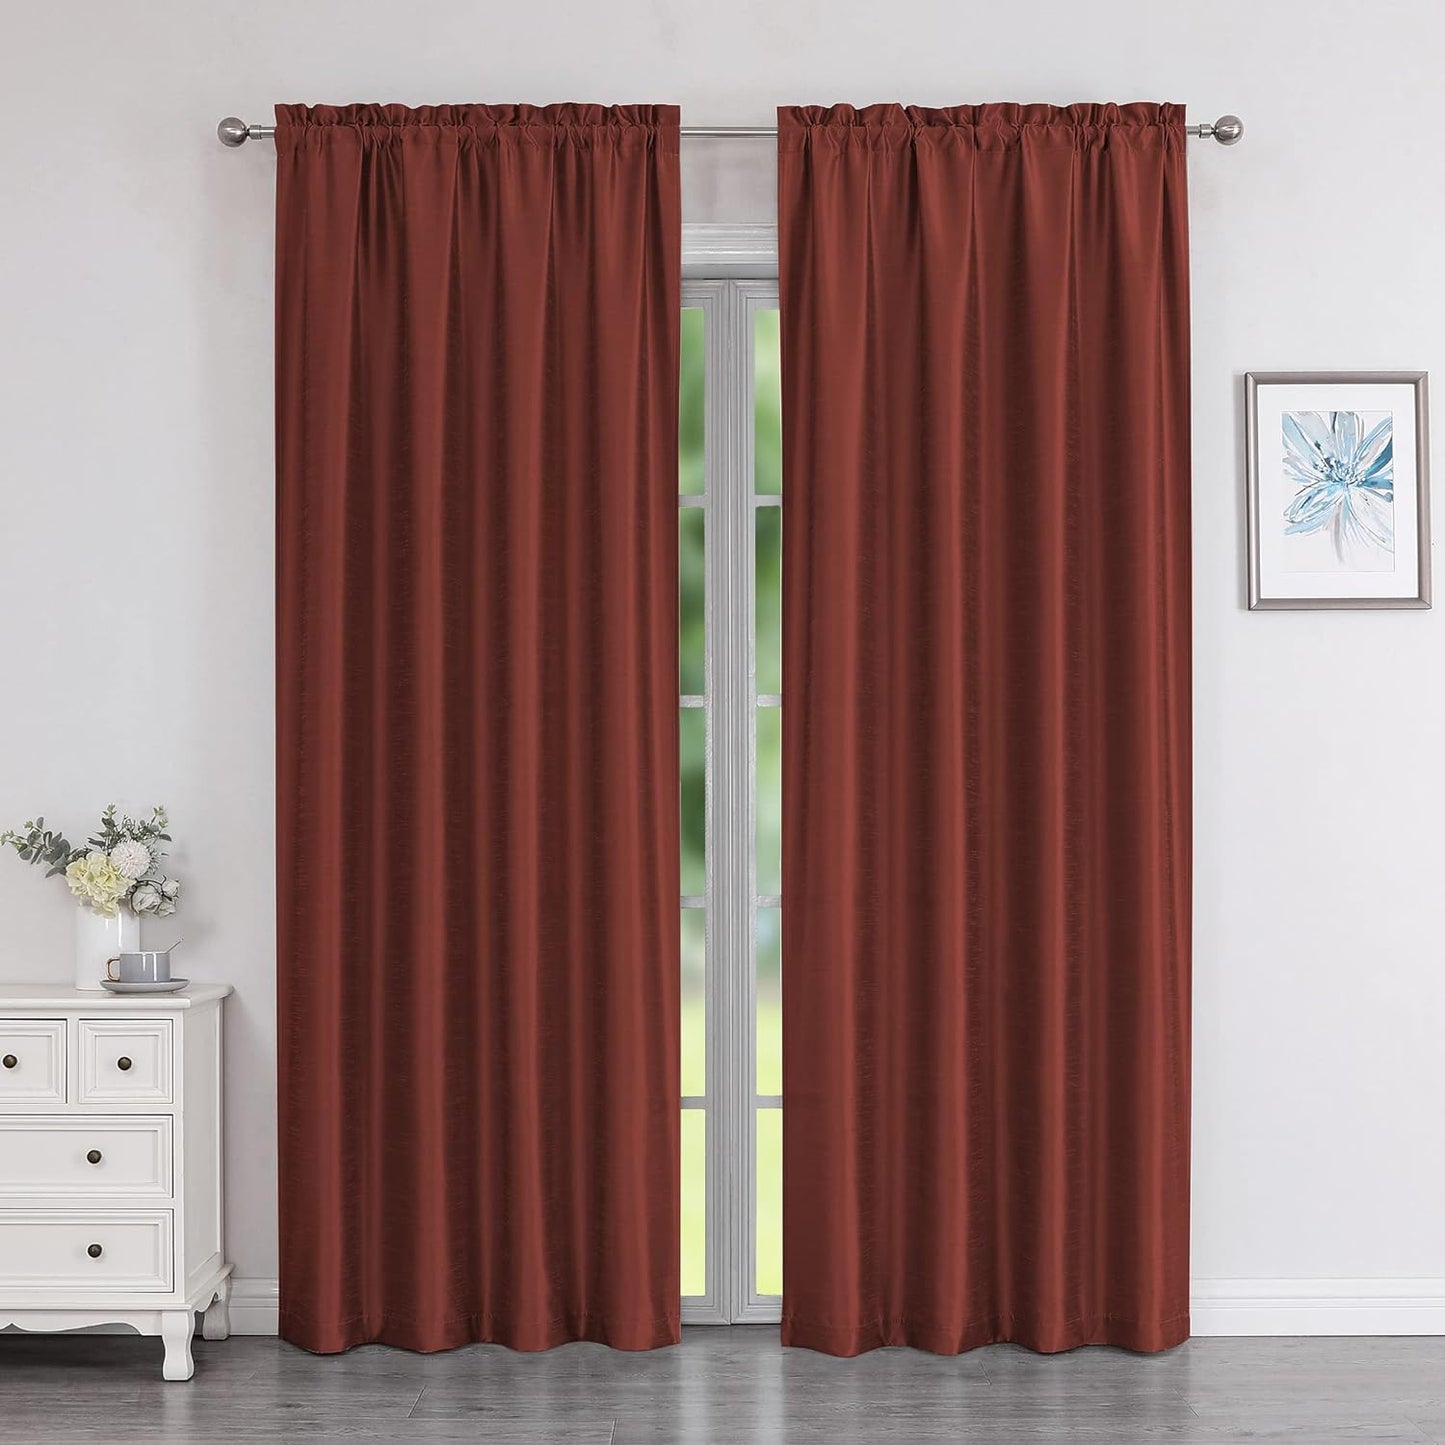 Chyhomenyc Uptown Sage Green Kitchen Curtains 45 Inch Length 2 Panels, Room Darkening Faux Silk Chic Fabric Short Window Curtains for Bedroom Living Room, Each 30Wx45L  Chyhomenyc Brick 2X30"Wx84"L 